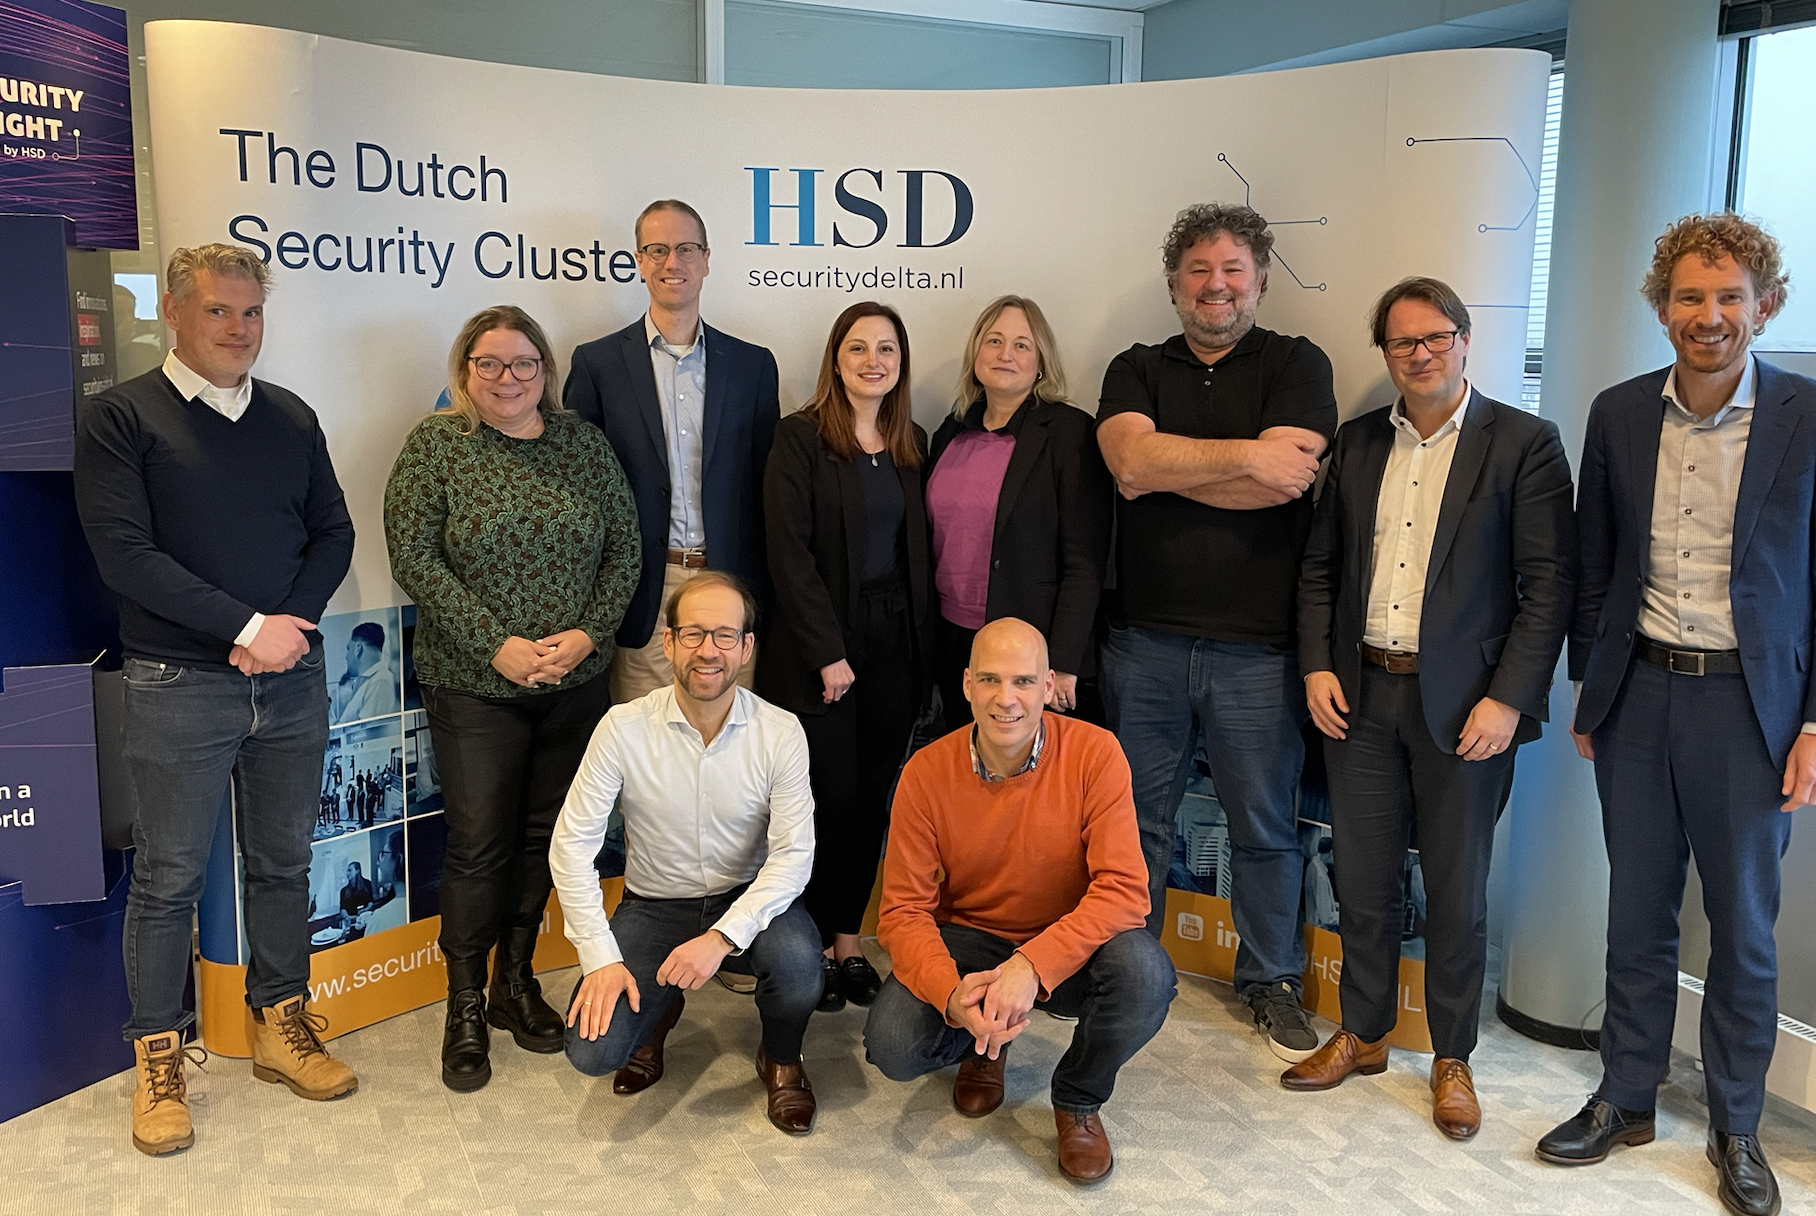 HSD Partners Share Expertise with FERM during Market Consultation to Improve Cyber Crisis Training